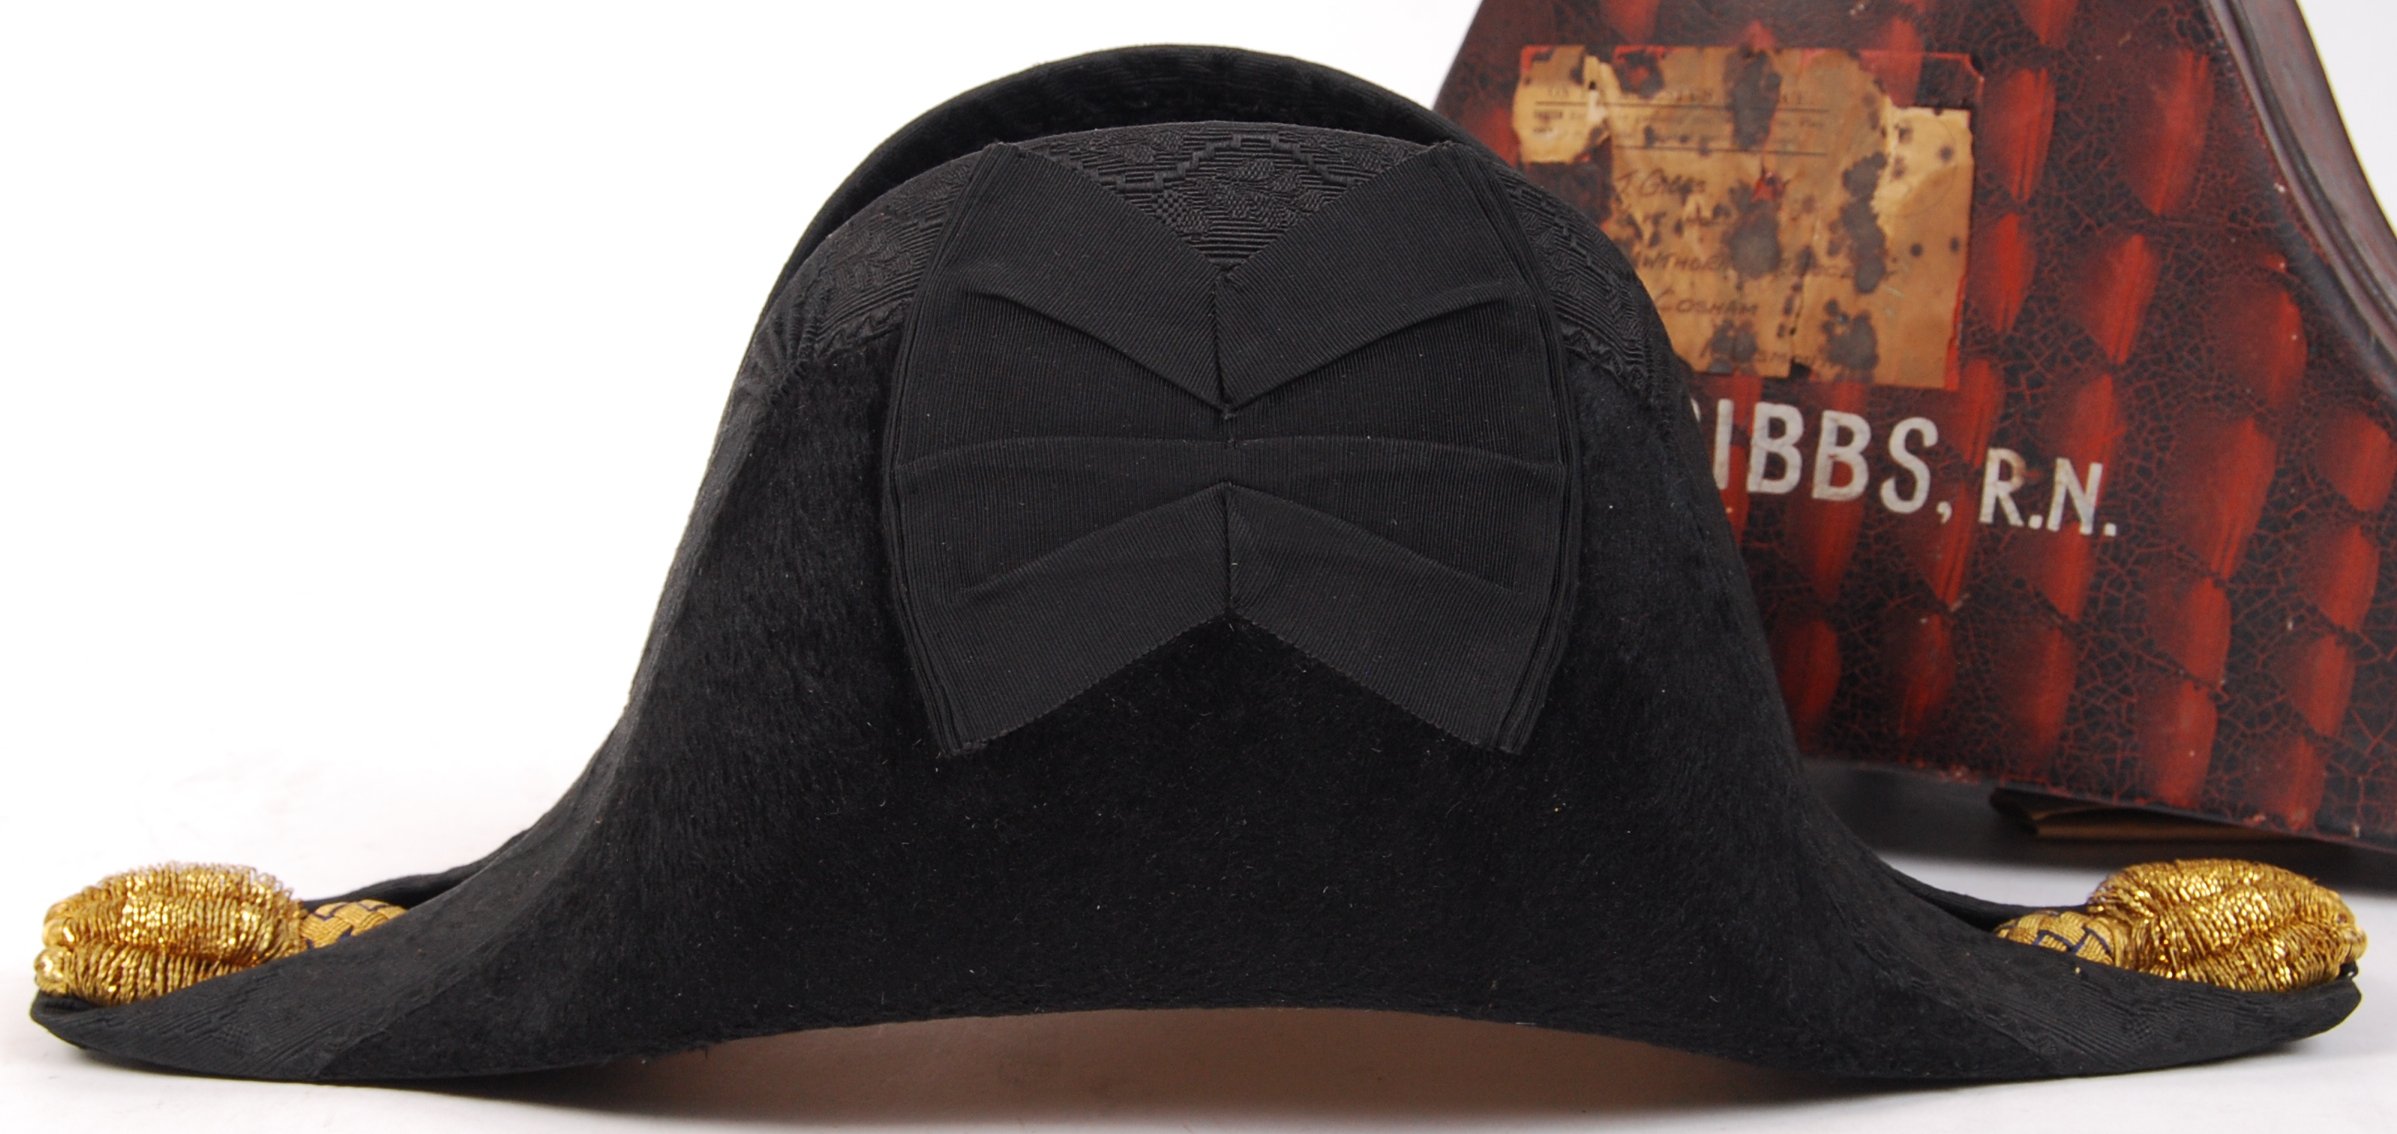 EARLY 20TH CENTURY NAVAL BICORN HAT - Image 3 of 8